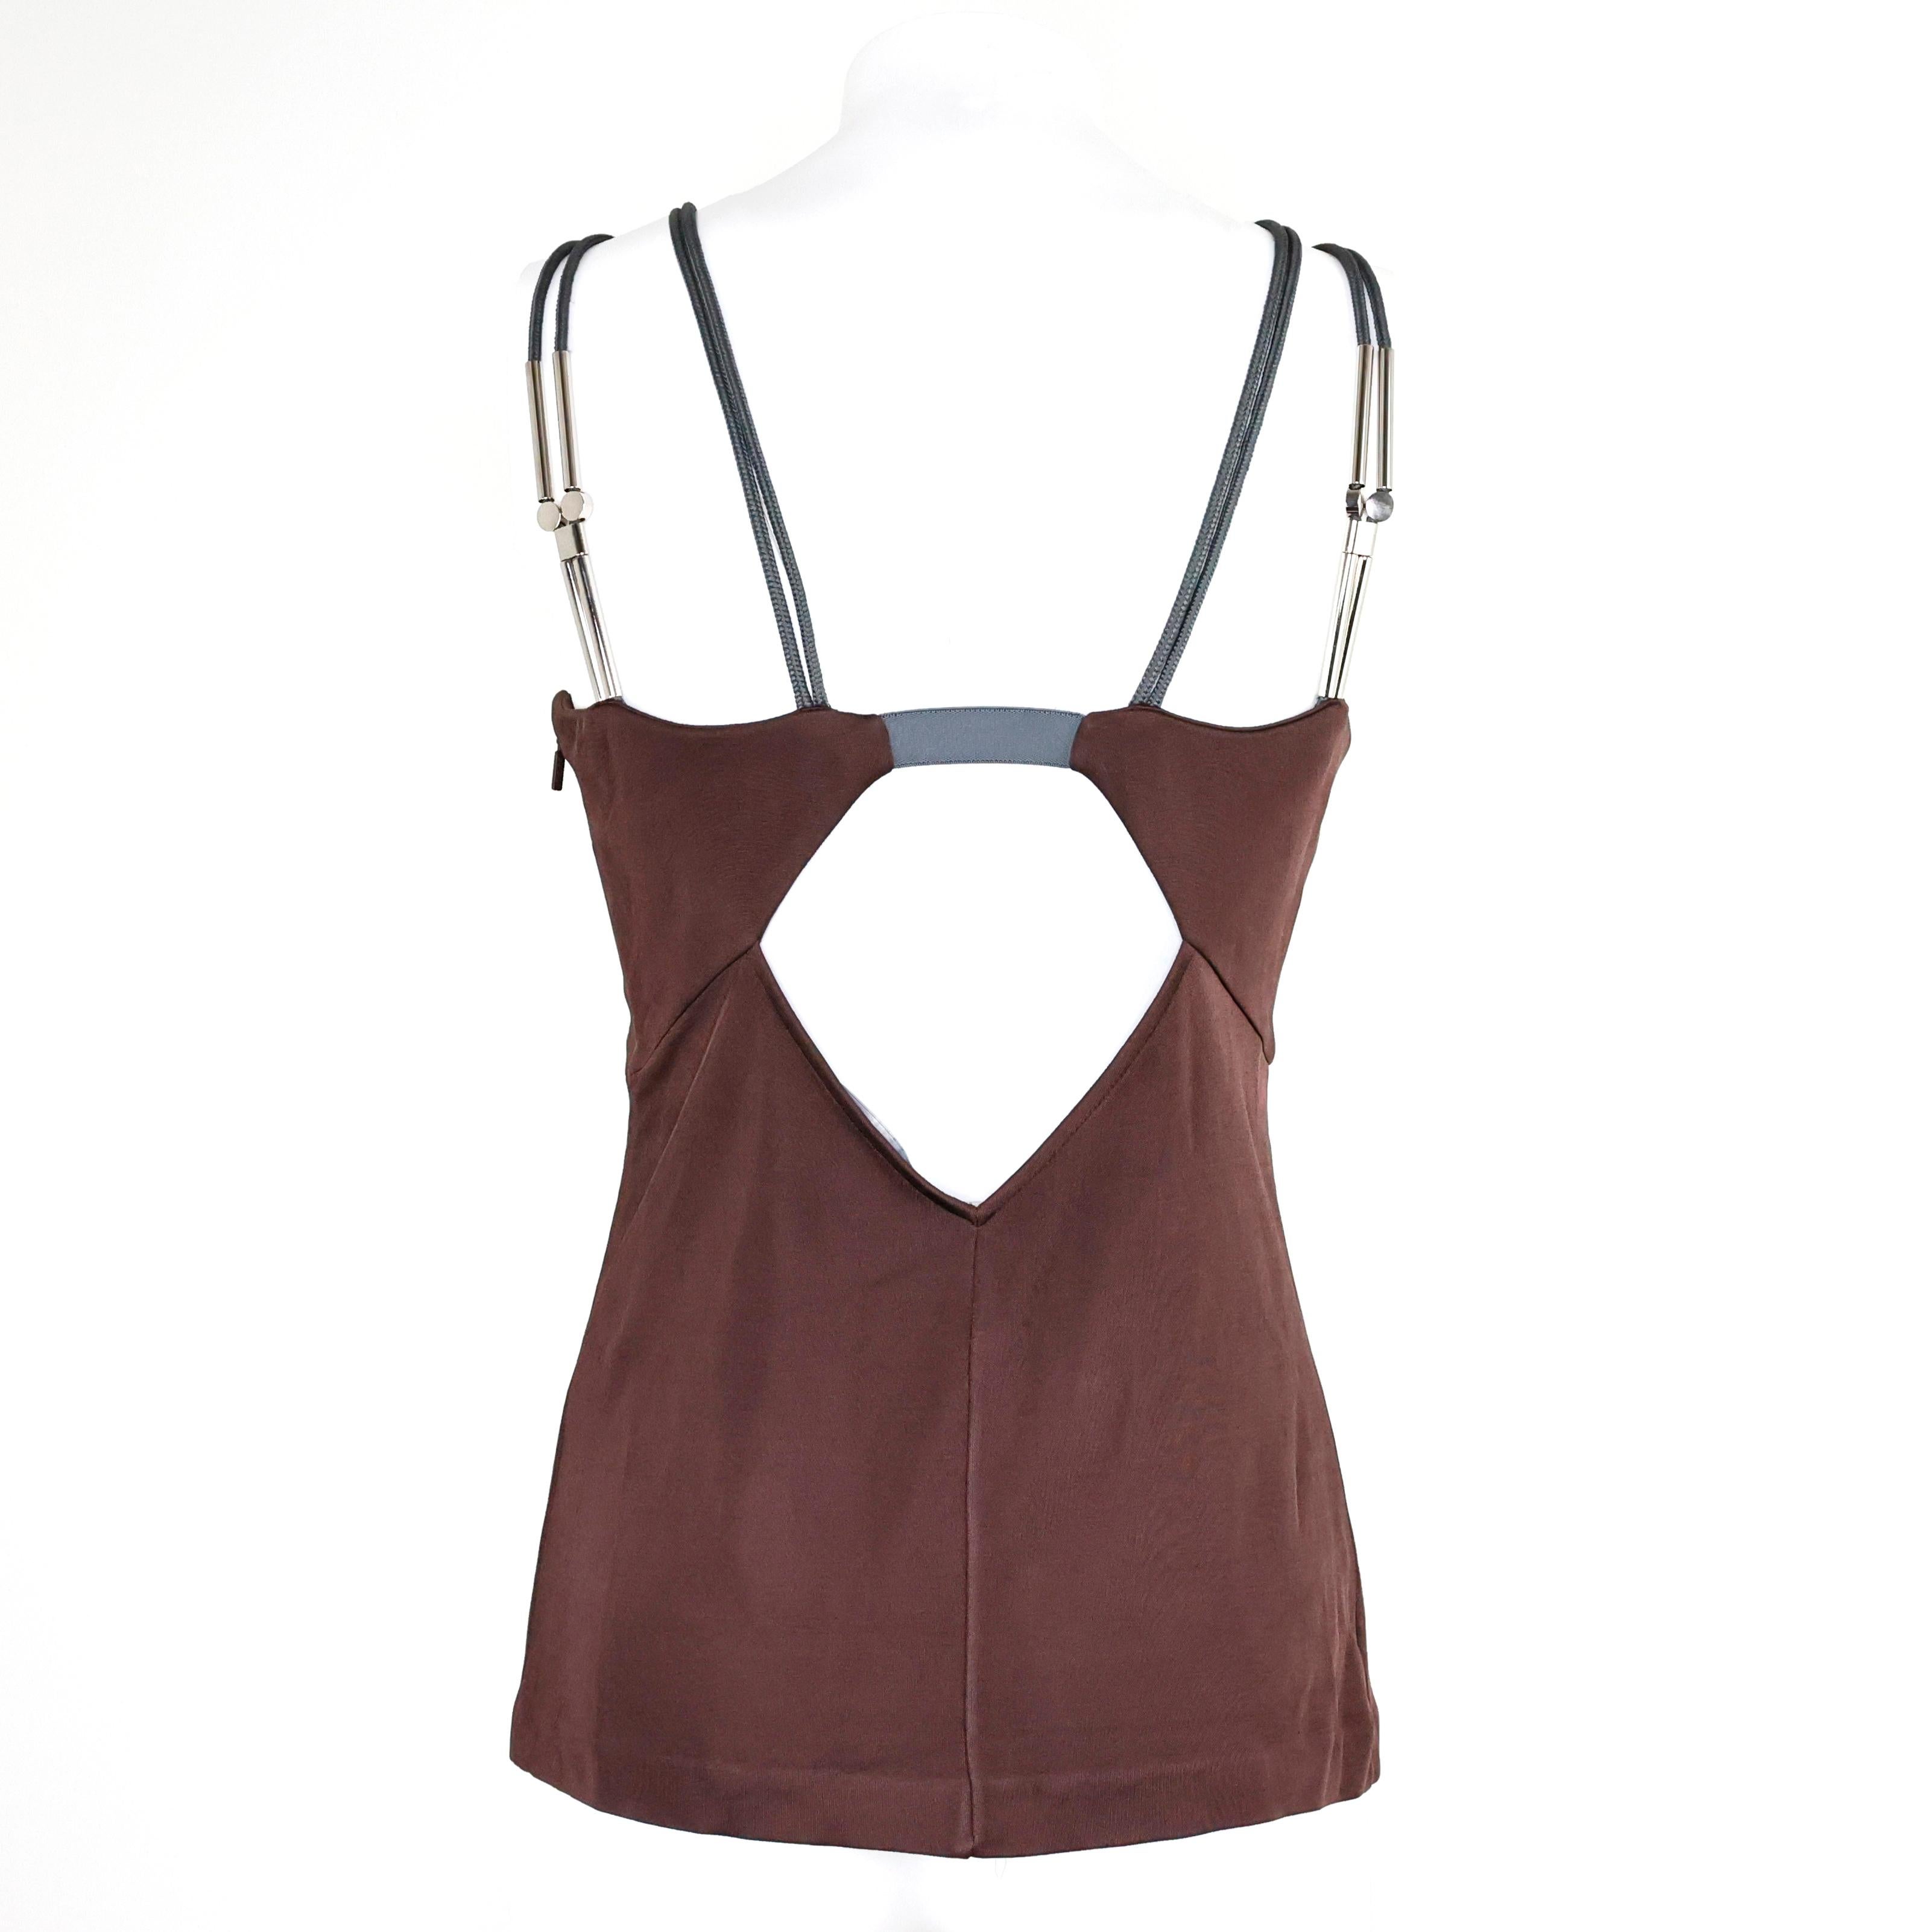 Gucci sleeveless embellished brown top. Size M

Condition:
Really good.